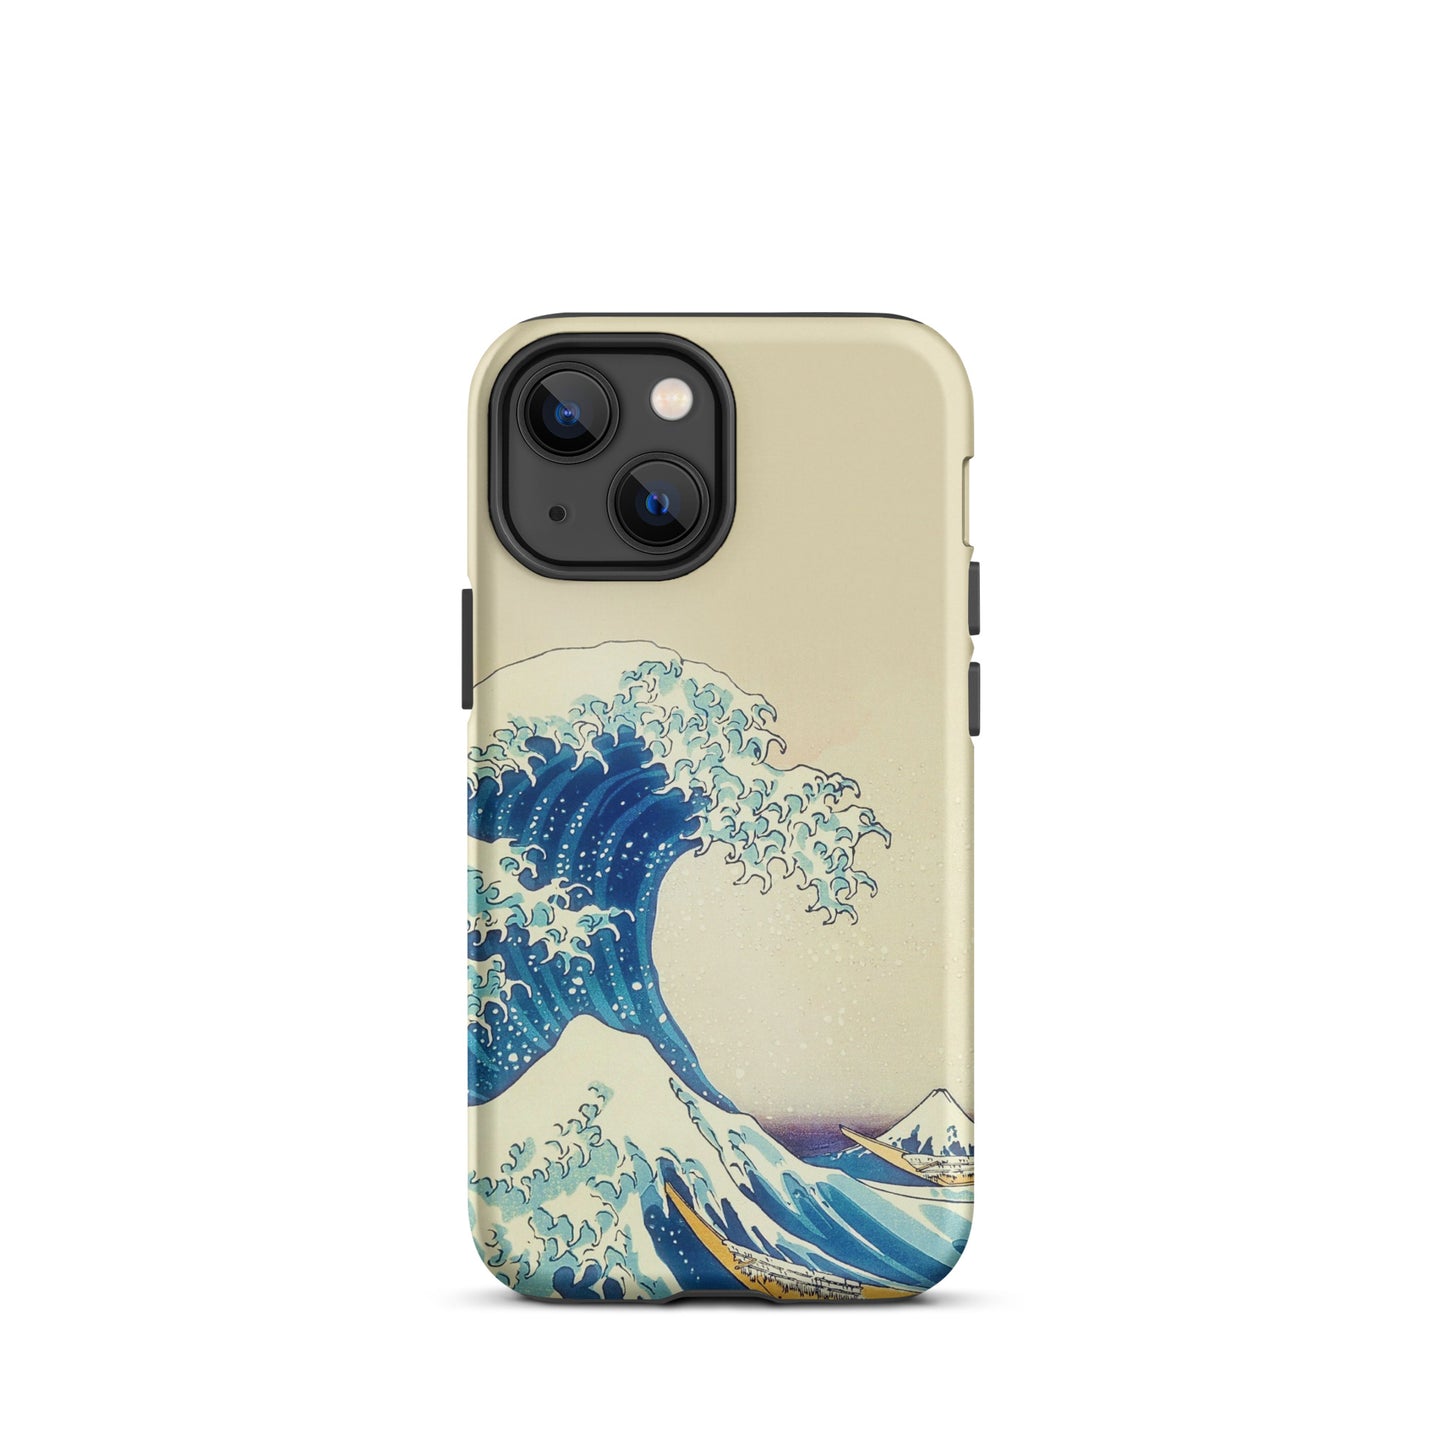 Waves iPhone case